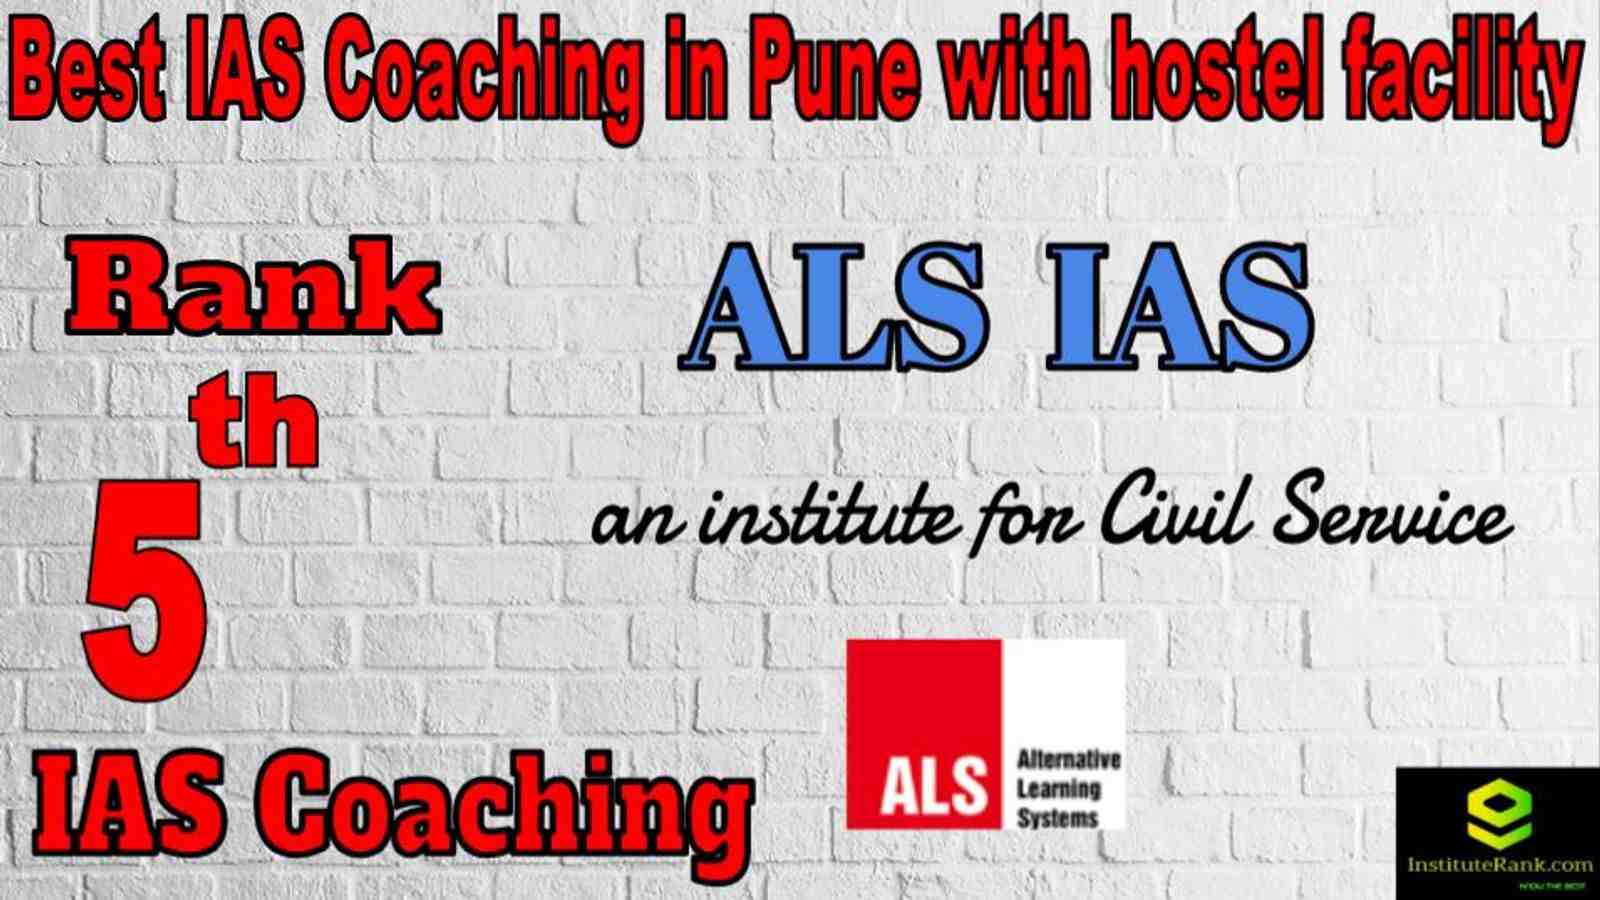 5th Best IAS Coaching in Pune with hostel facility